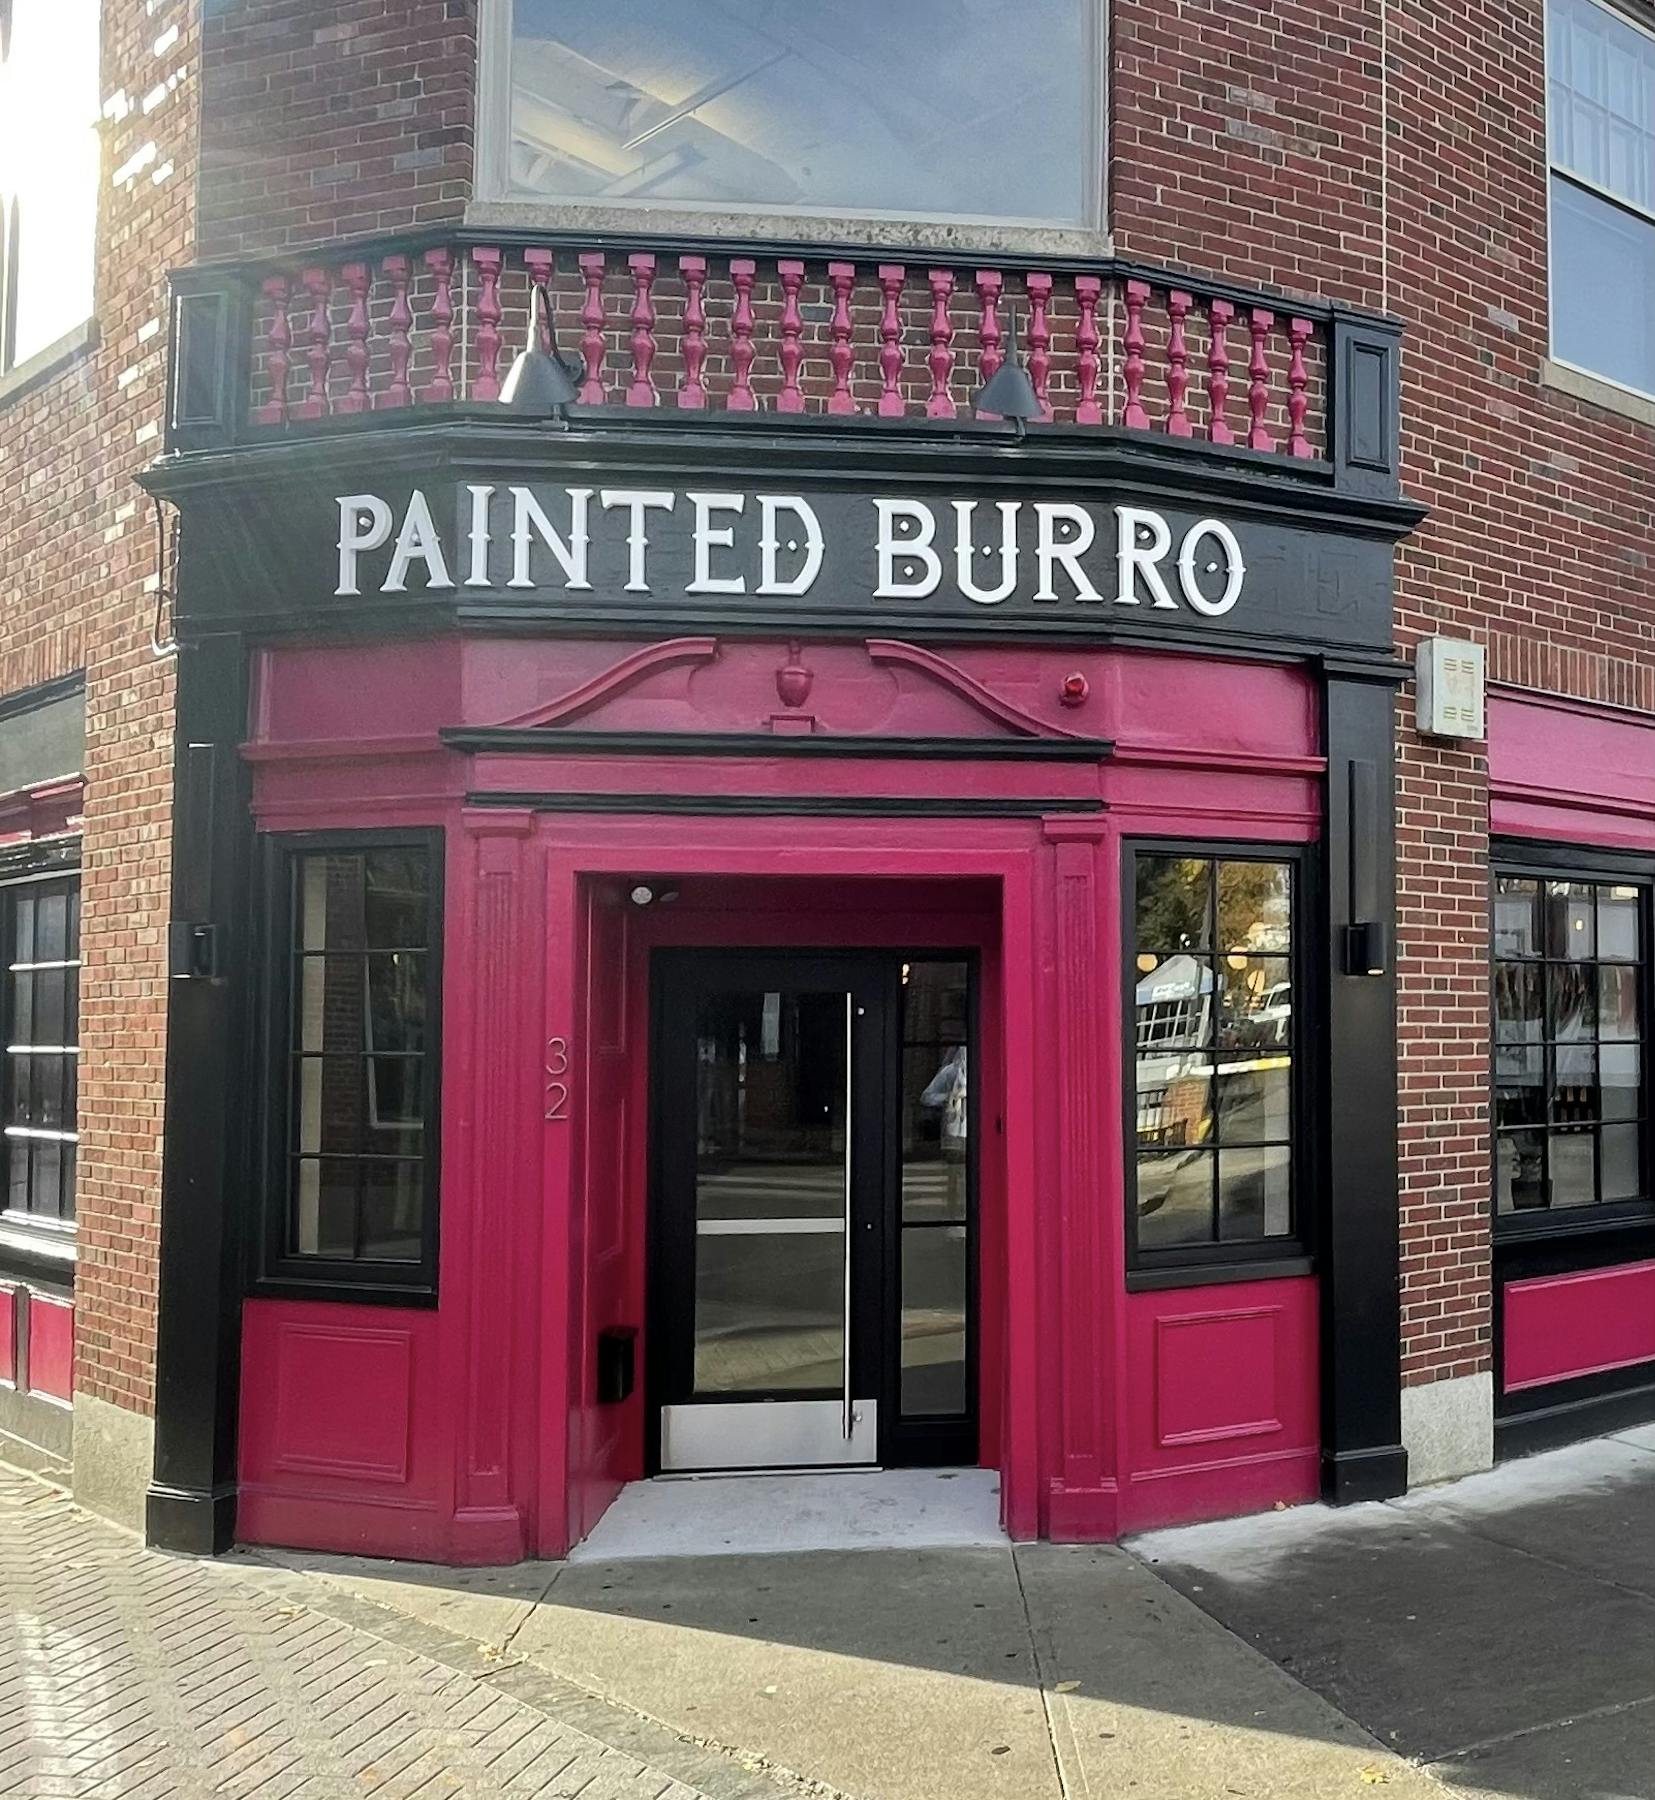 Painted Burro opening: Restaurant to move into old Border Cafe space